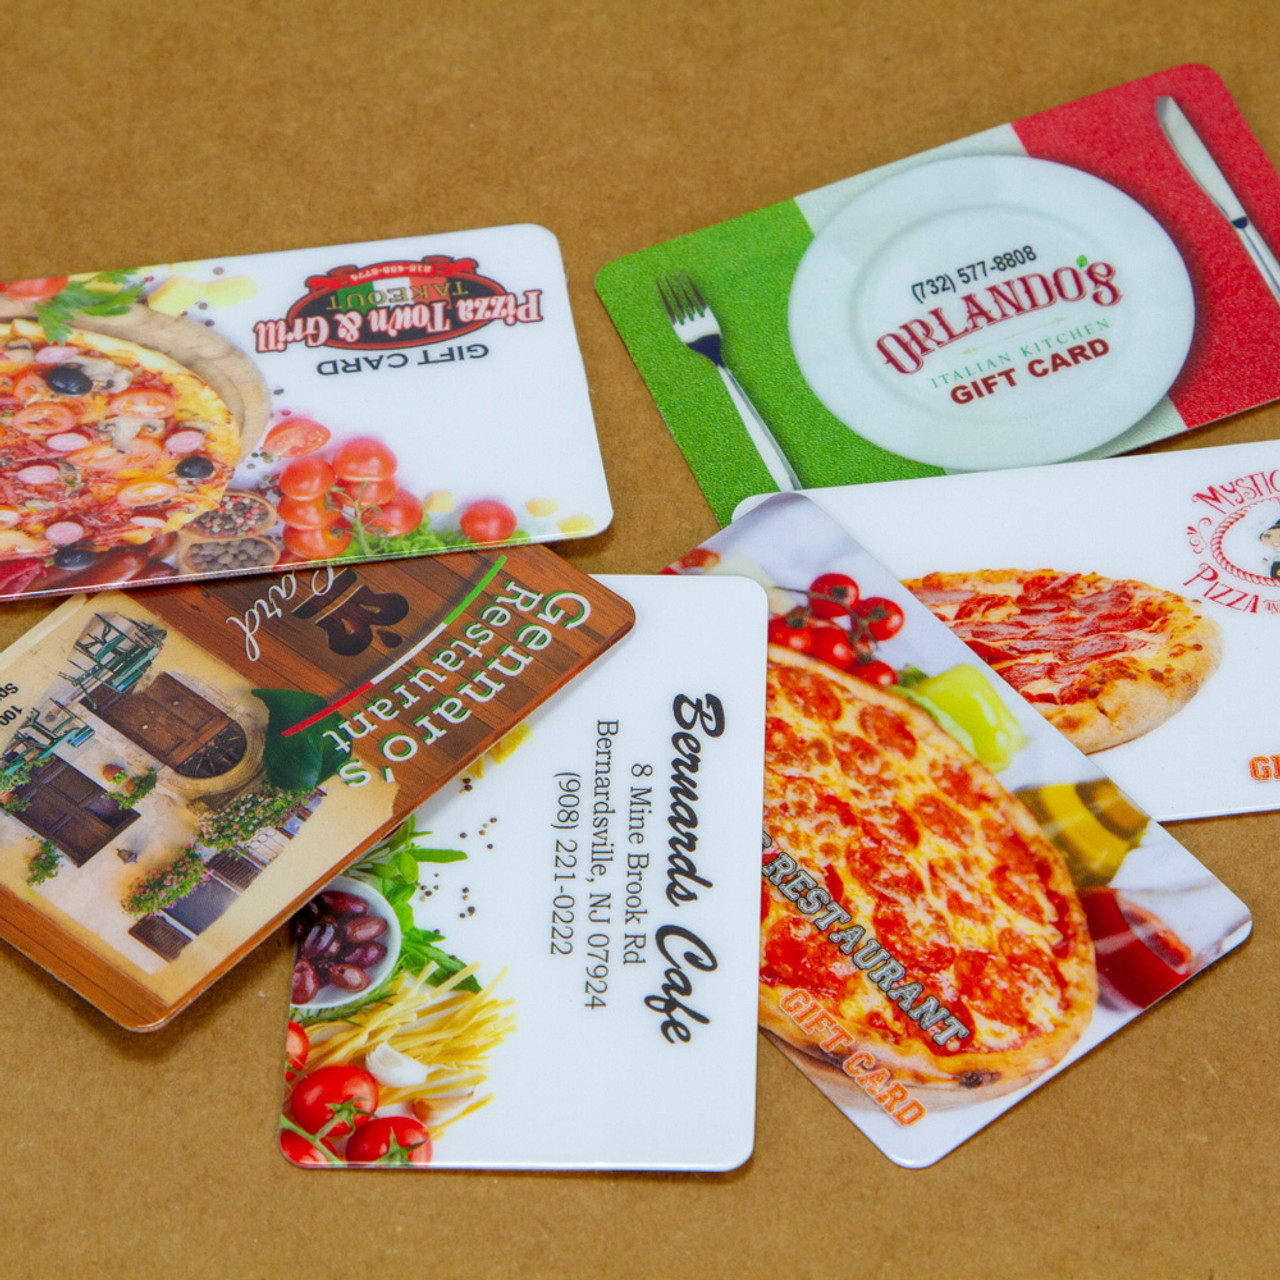 Get your Restaurant Amigo gift card or voucher directly by e-mail